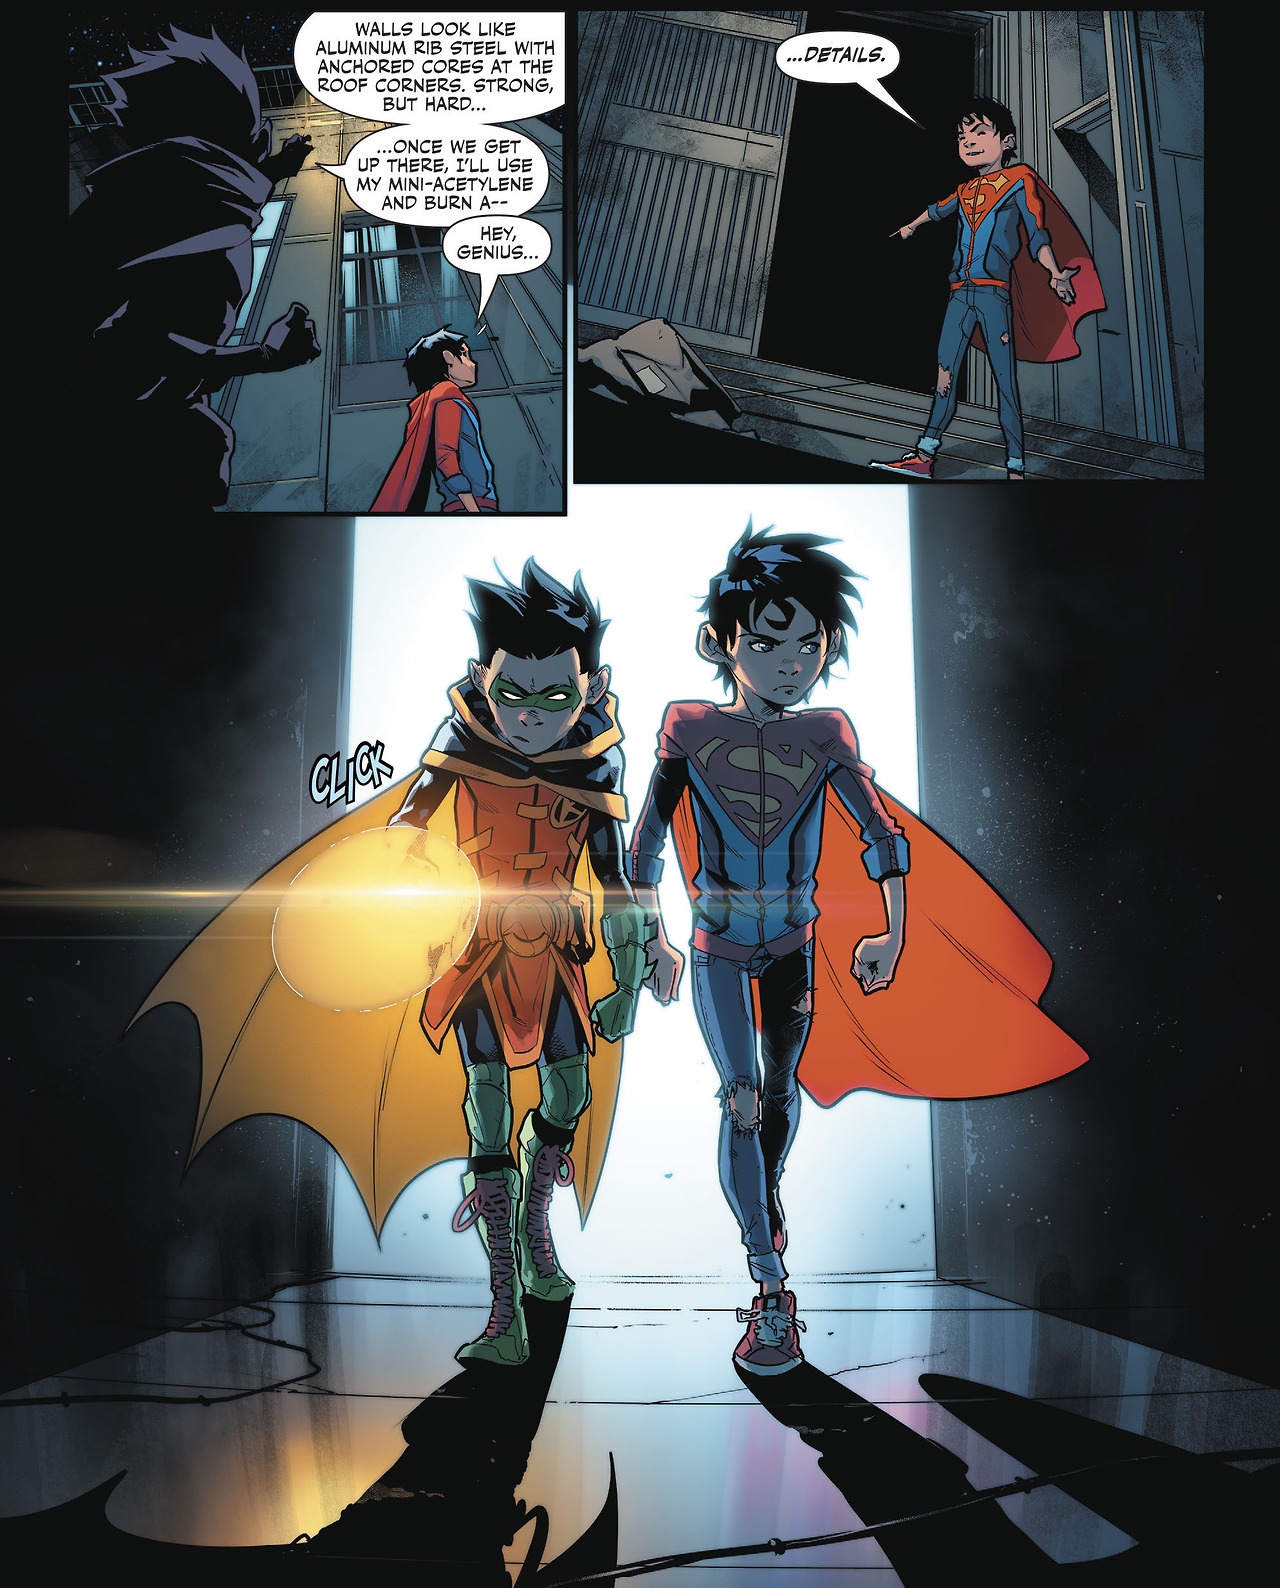 Jon gives as good as he gets in Super Sons #2!